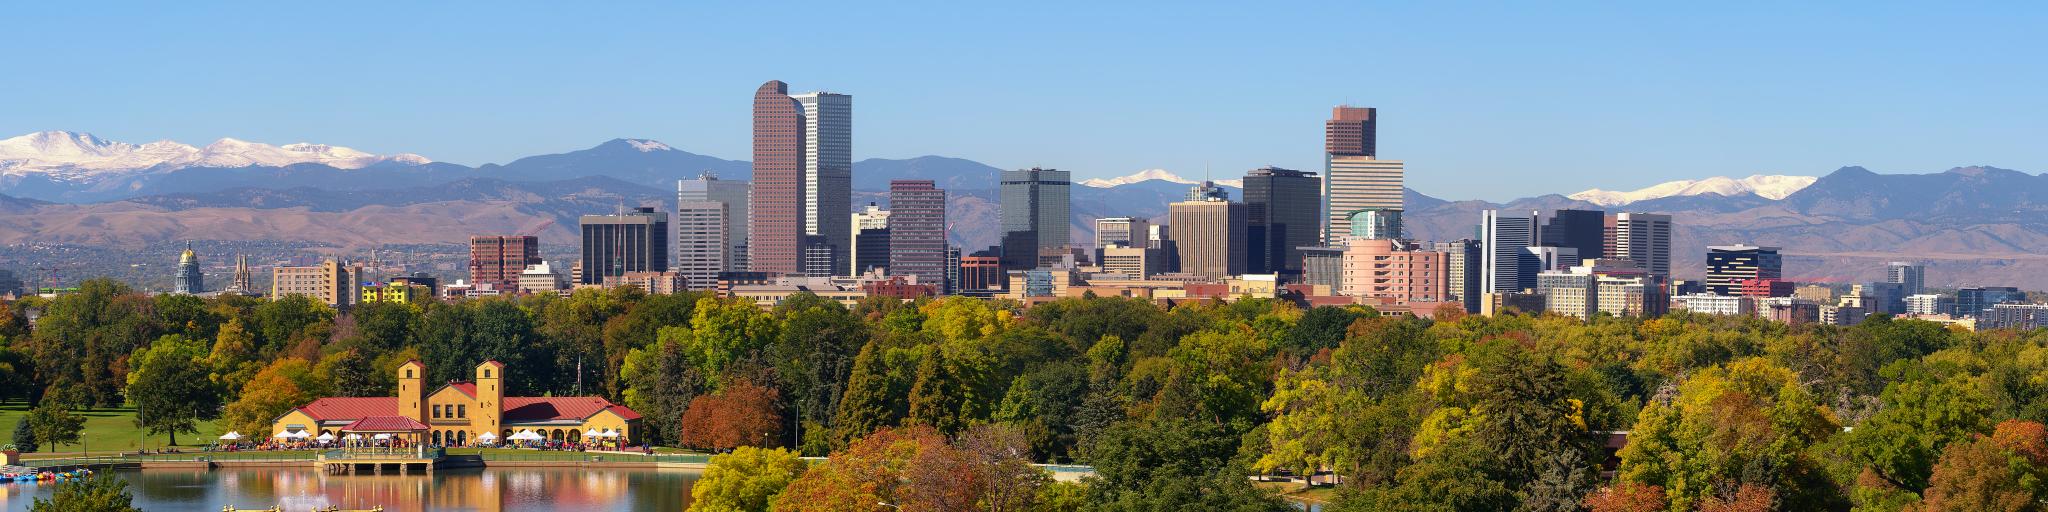 Best time to go to Denver - different seasons and events in the Mile High City